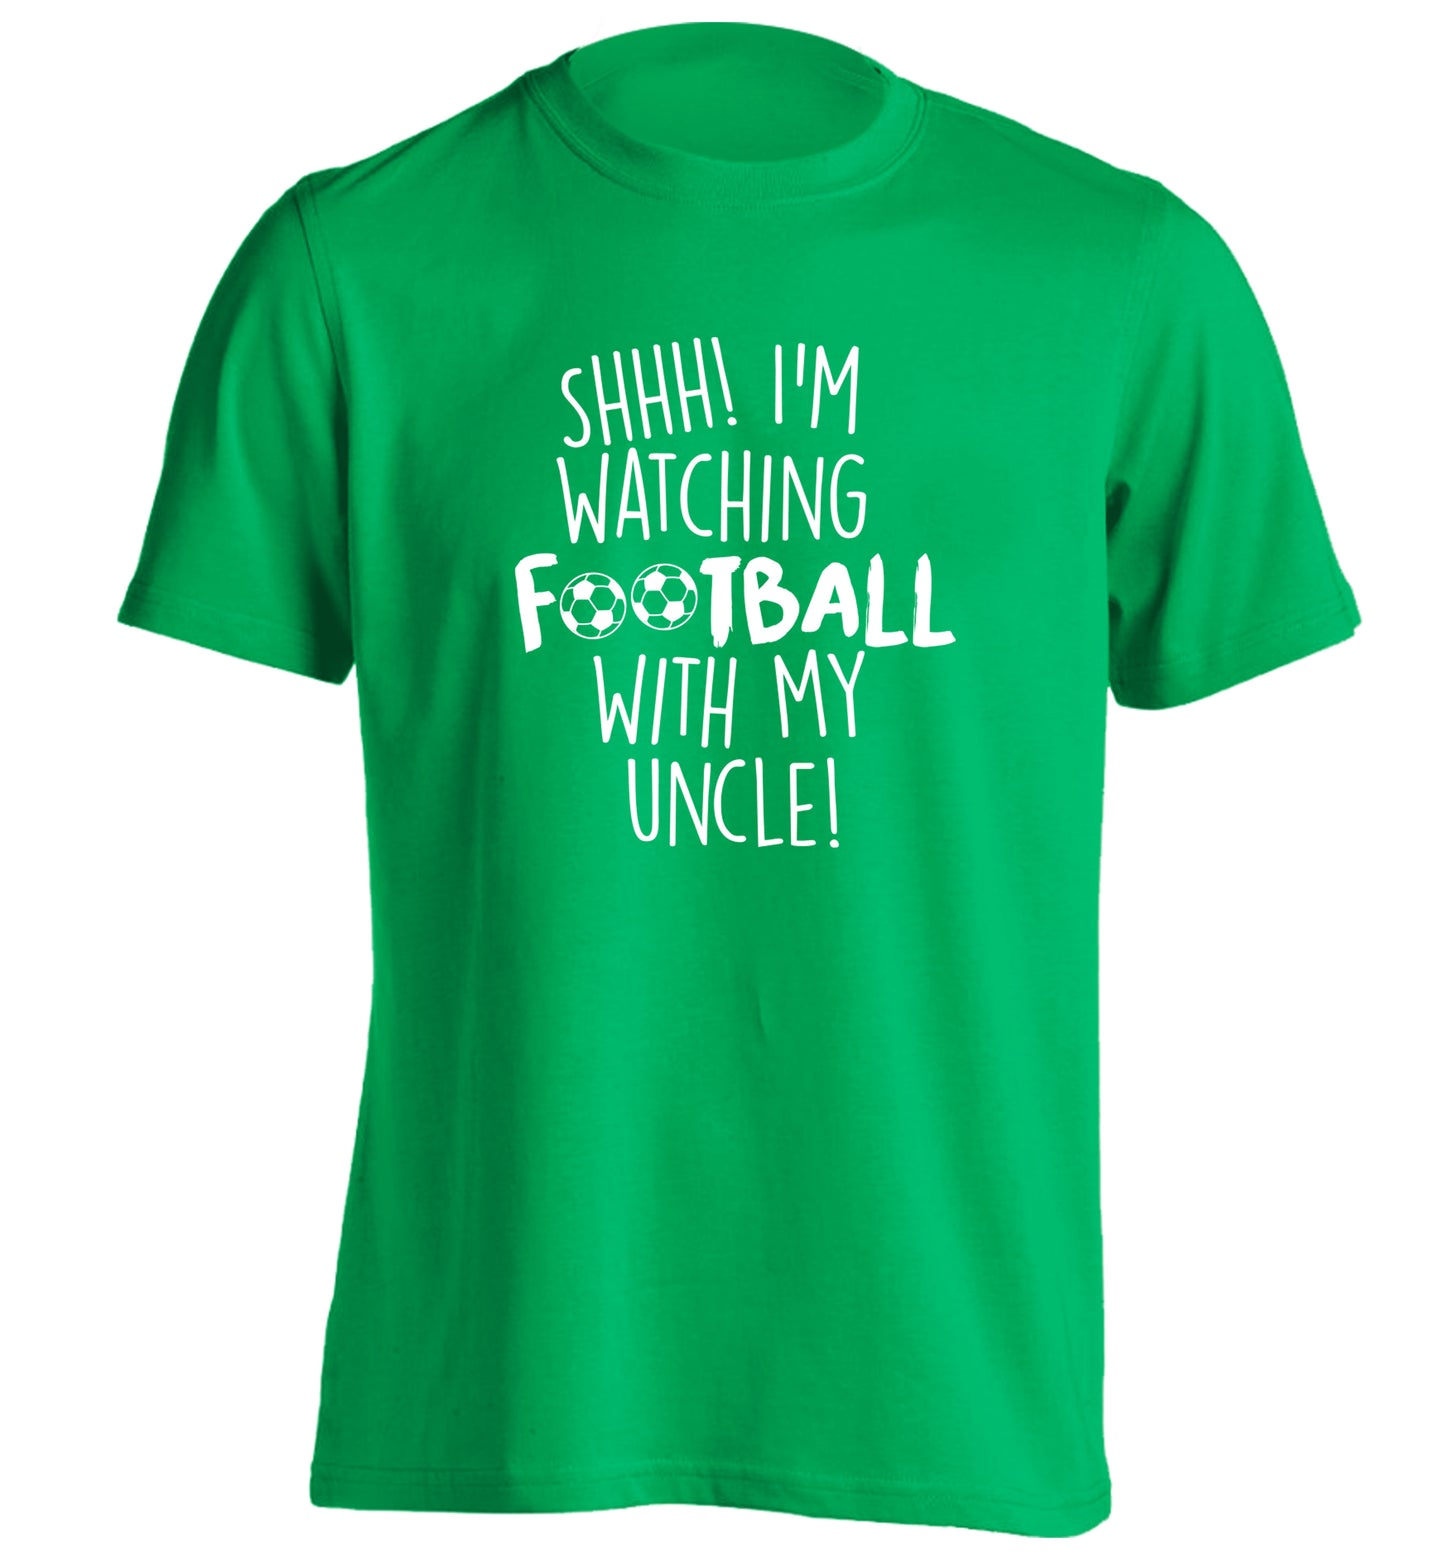 Shhh I'm watching football with my uncle adults unisexgreen Tshirt 2XL